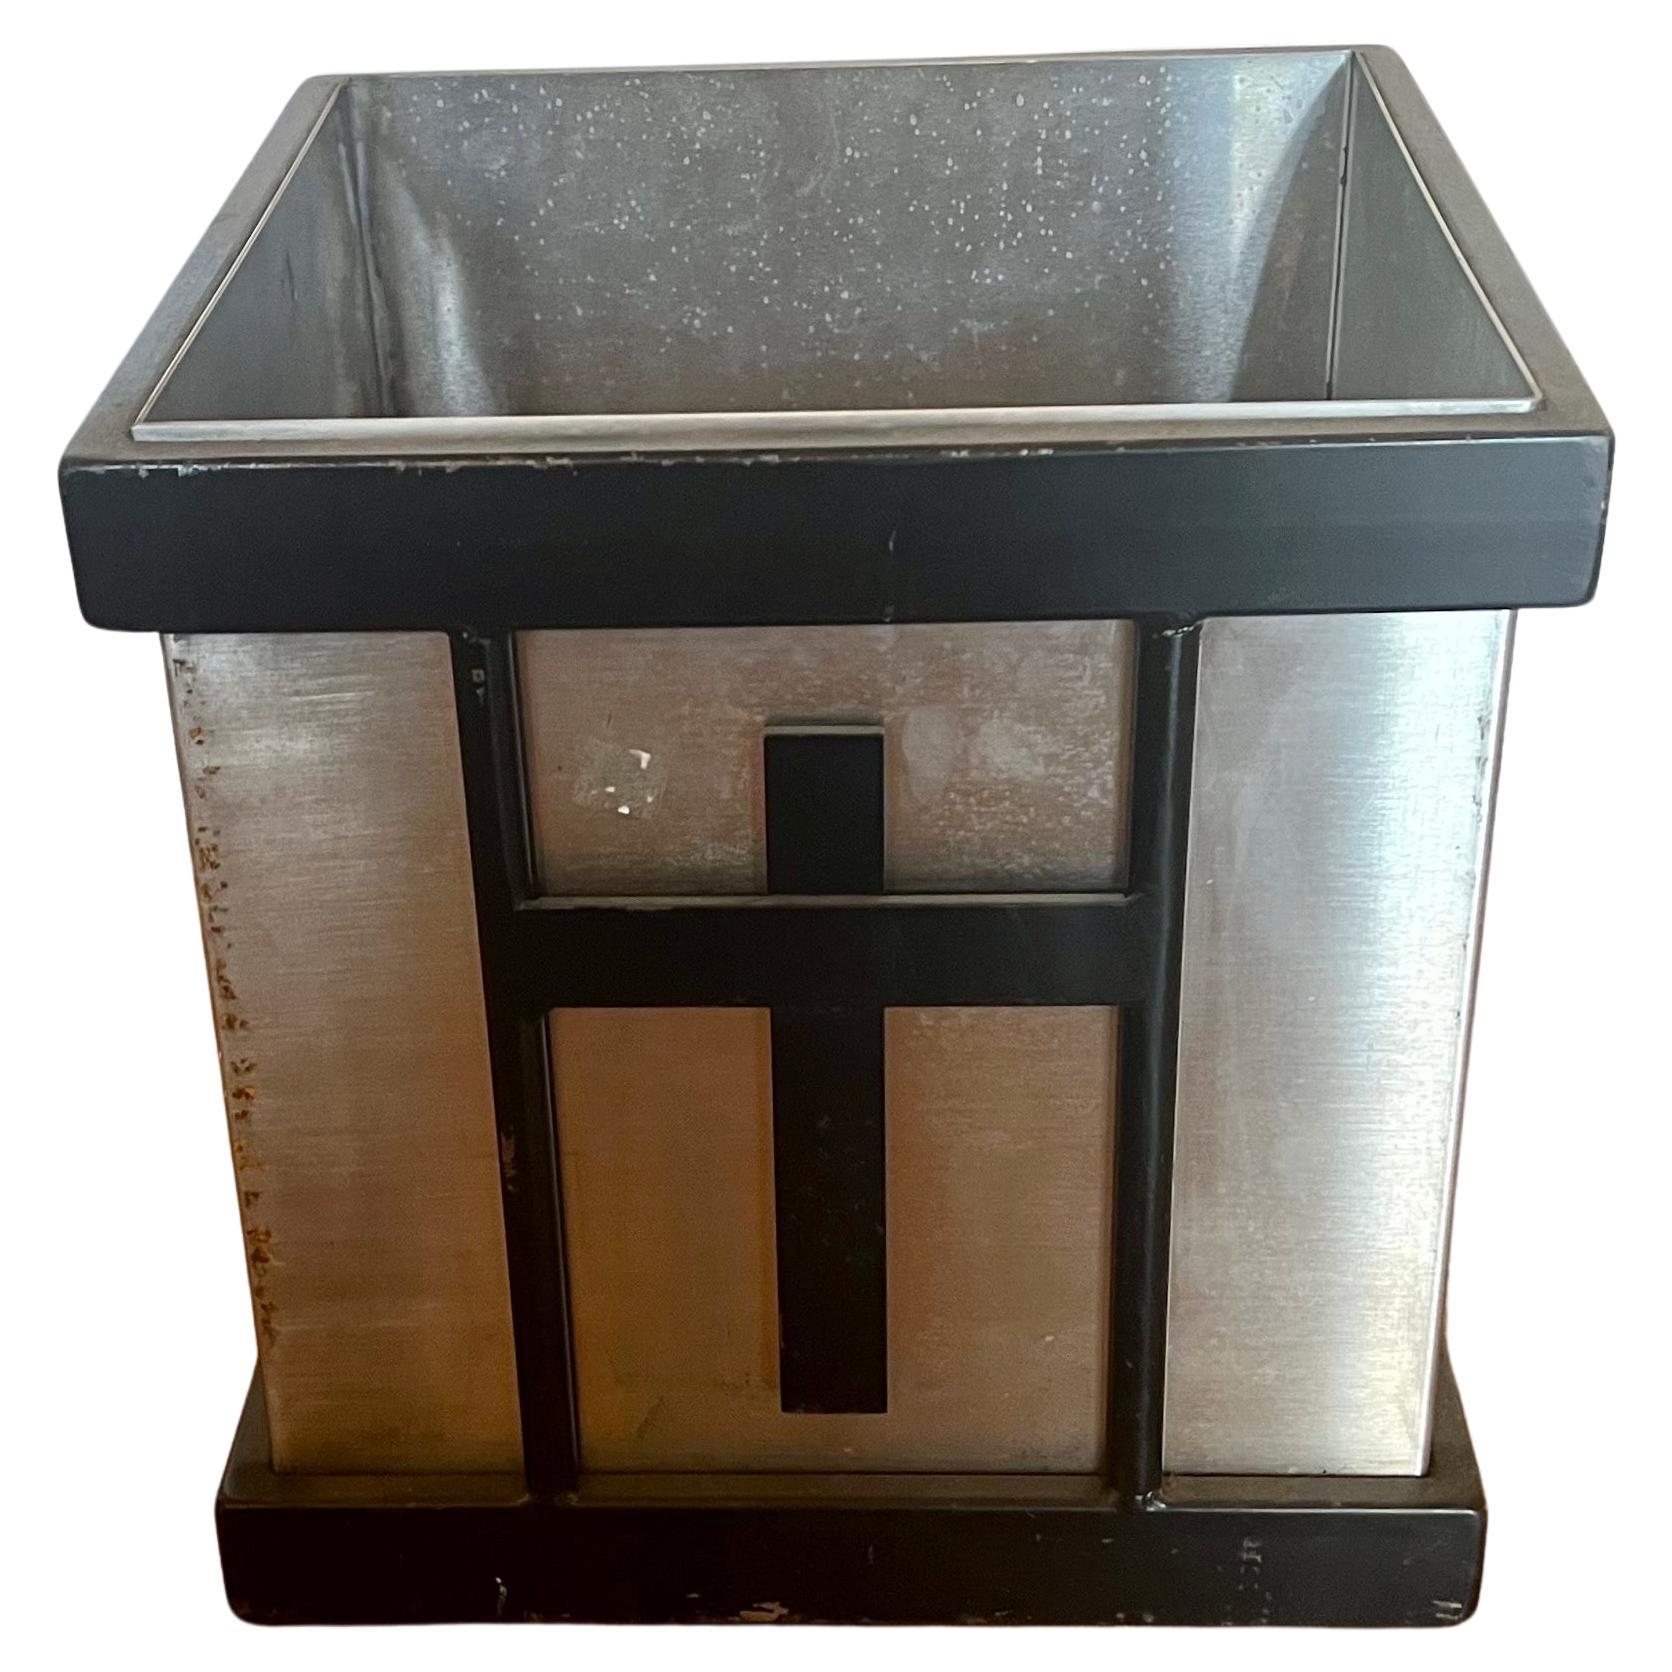 Rare solid stainless steel custom-made planter, waste basket with black enameled steel metal accents circa 1980's.